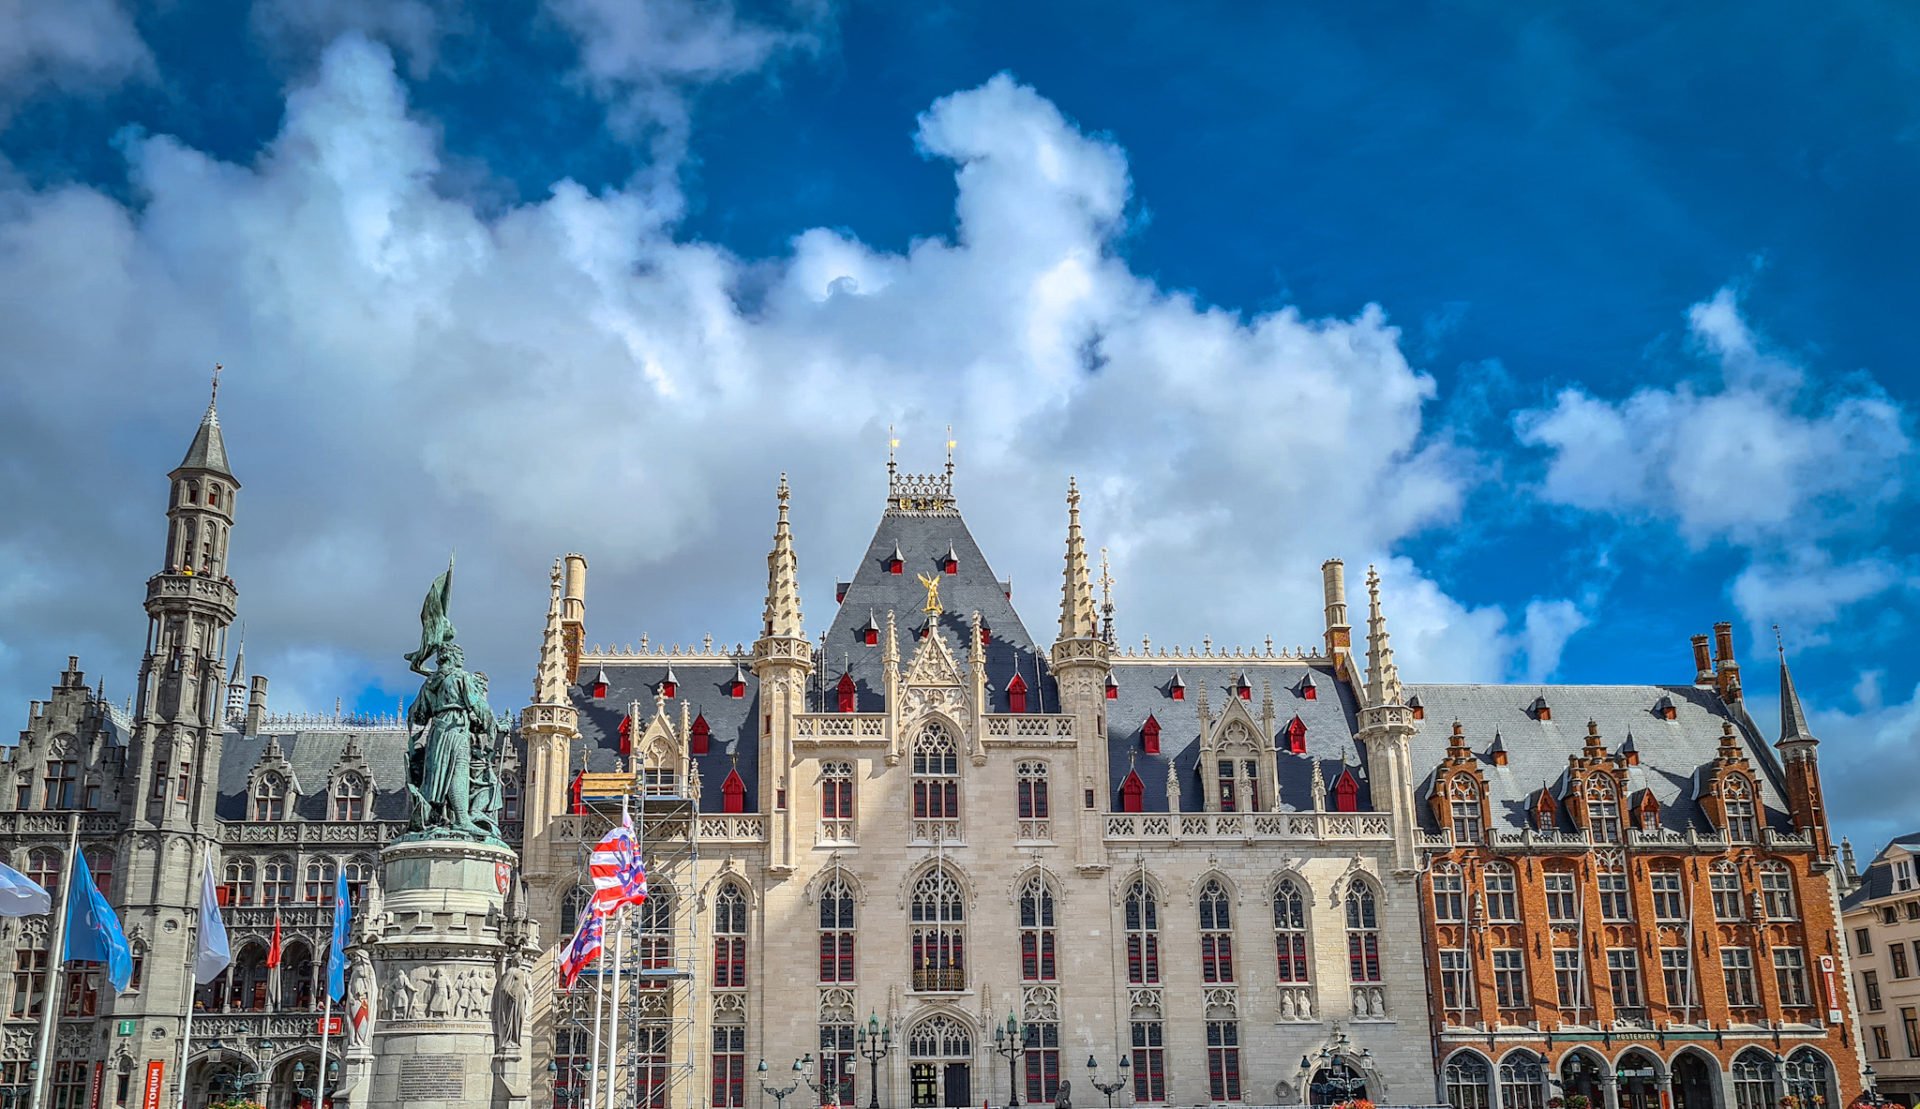 Useful Information to Know Before You Visit Bruges